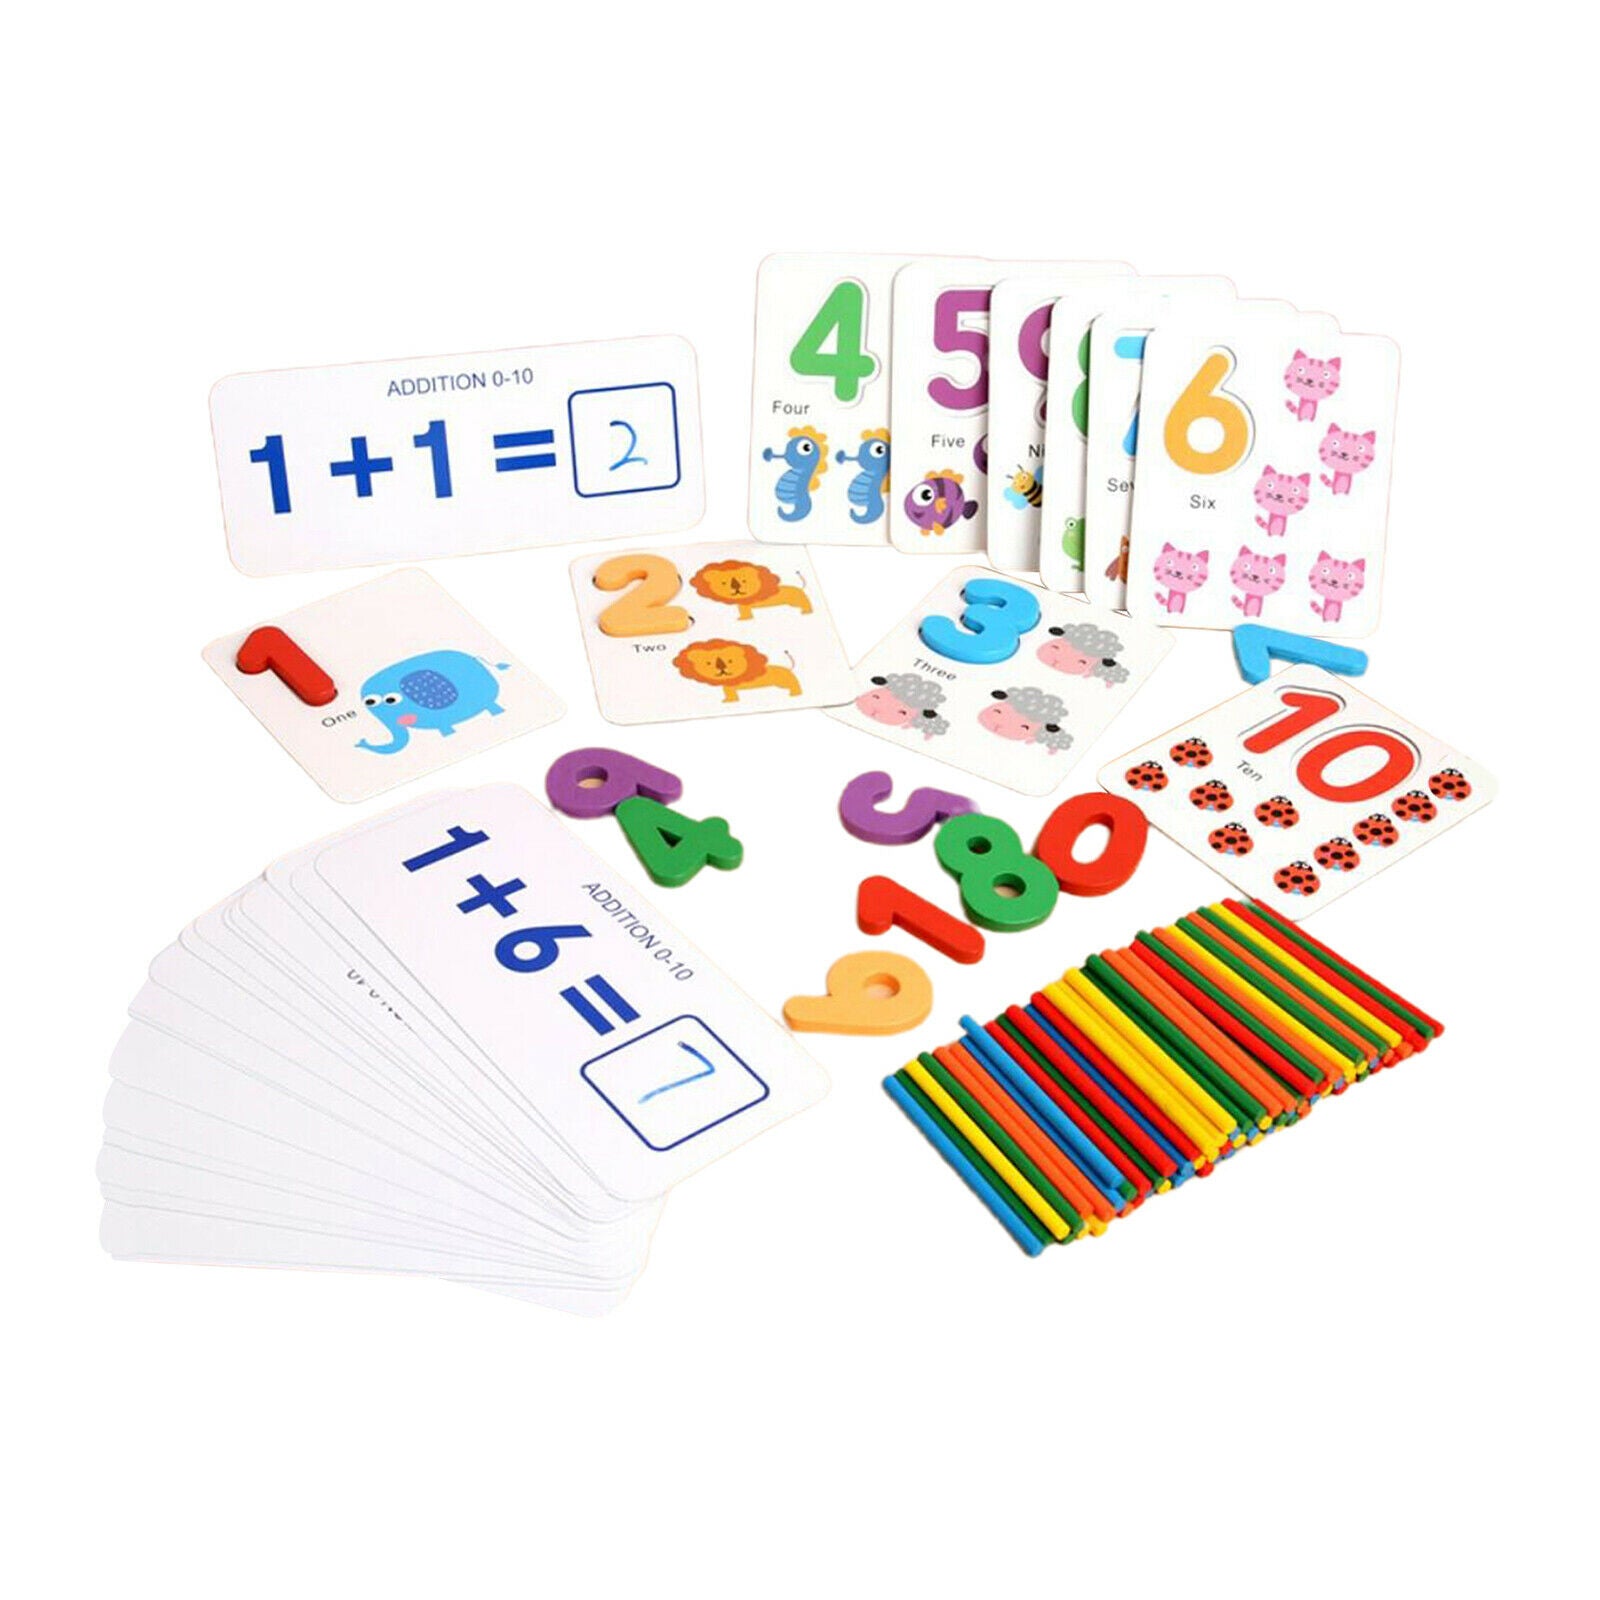 Preschool Kids Math Educational Toys Counting Wooden Sticks Number Cards